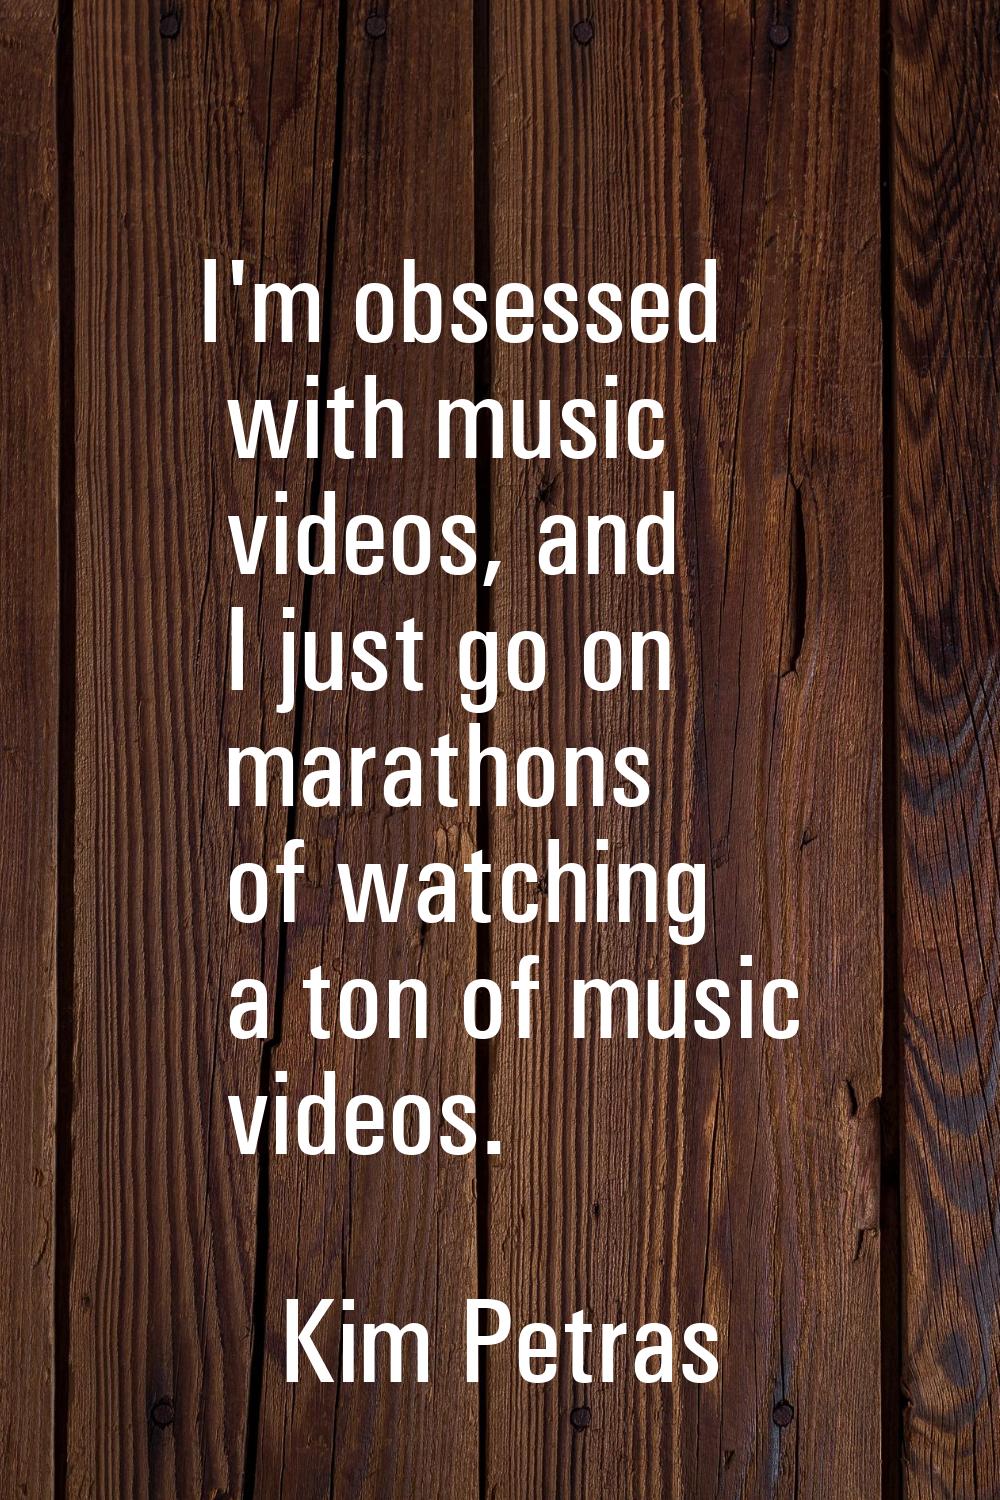 I'm obsessed with music videos, and I just go on marathons of watching a ton of music videos.